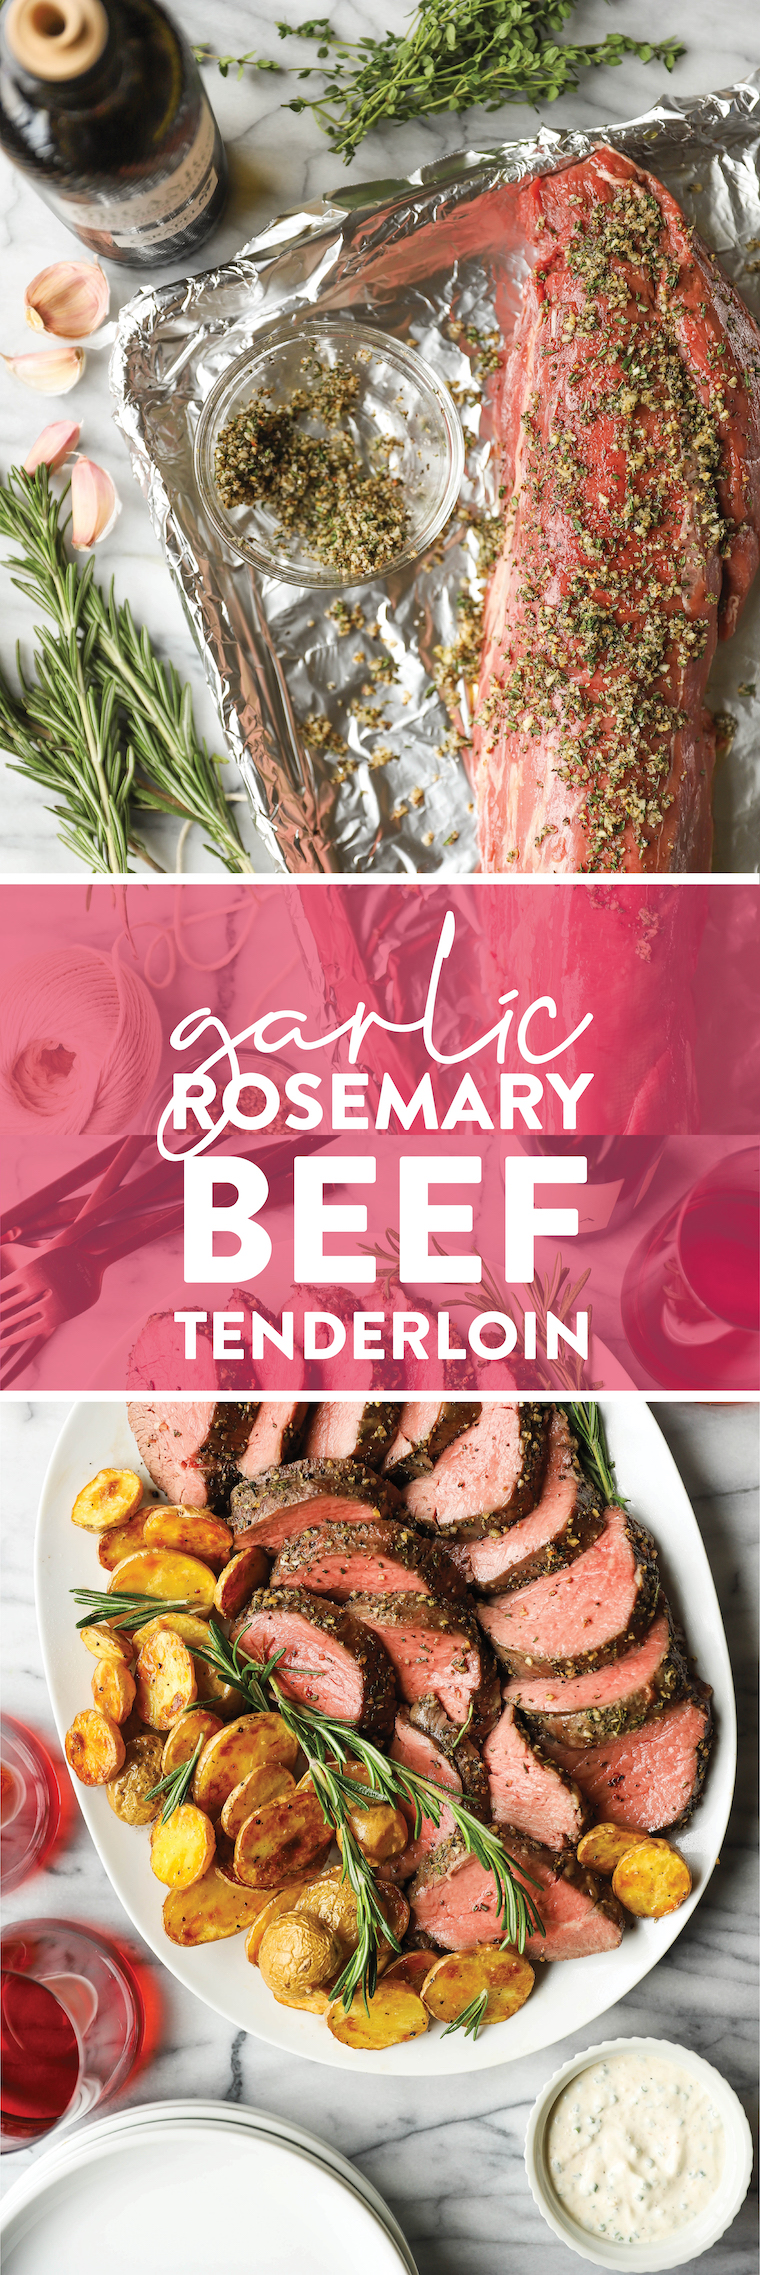 Garlic Rosemary Beef Tenderloin - Cooked low + slow, this is the most perfect (and only way to cook) tenderloin! So easy, so tender, so good.